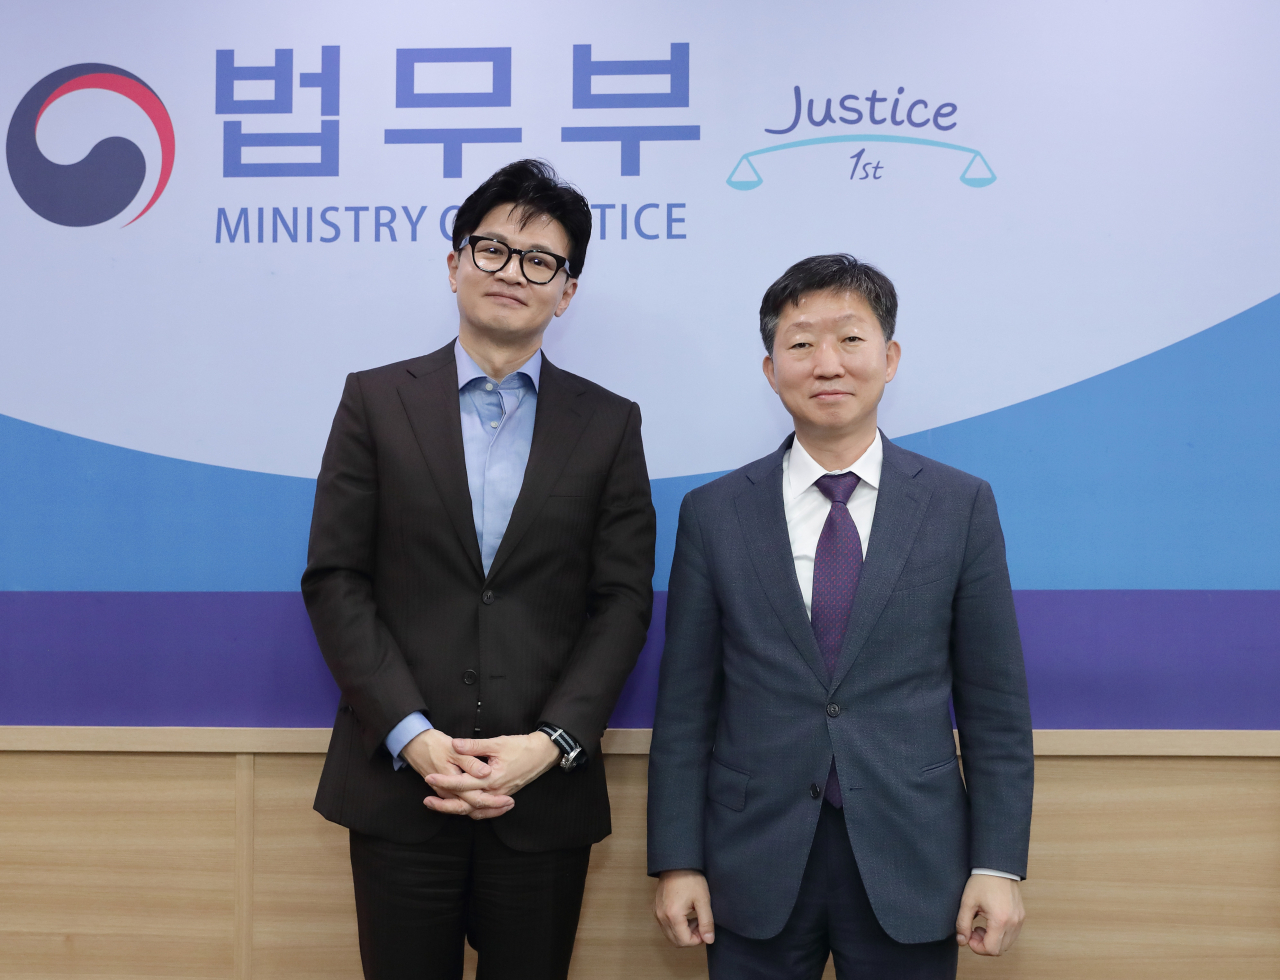 Justice Minister Han Dong-hoon, left, and Migration Research & Training Centre Director Woo Byong-yol poses for a photo at the government complex in Gwacheon, Gyeonggi Province in November. (Yonhap)